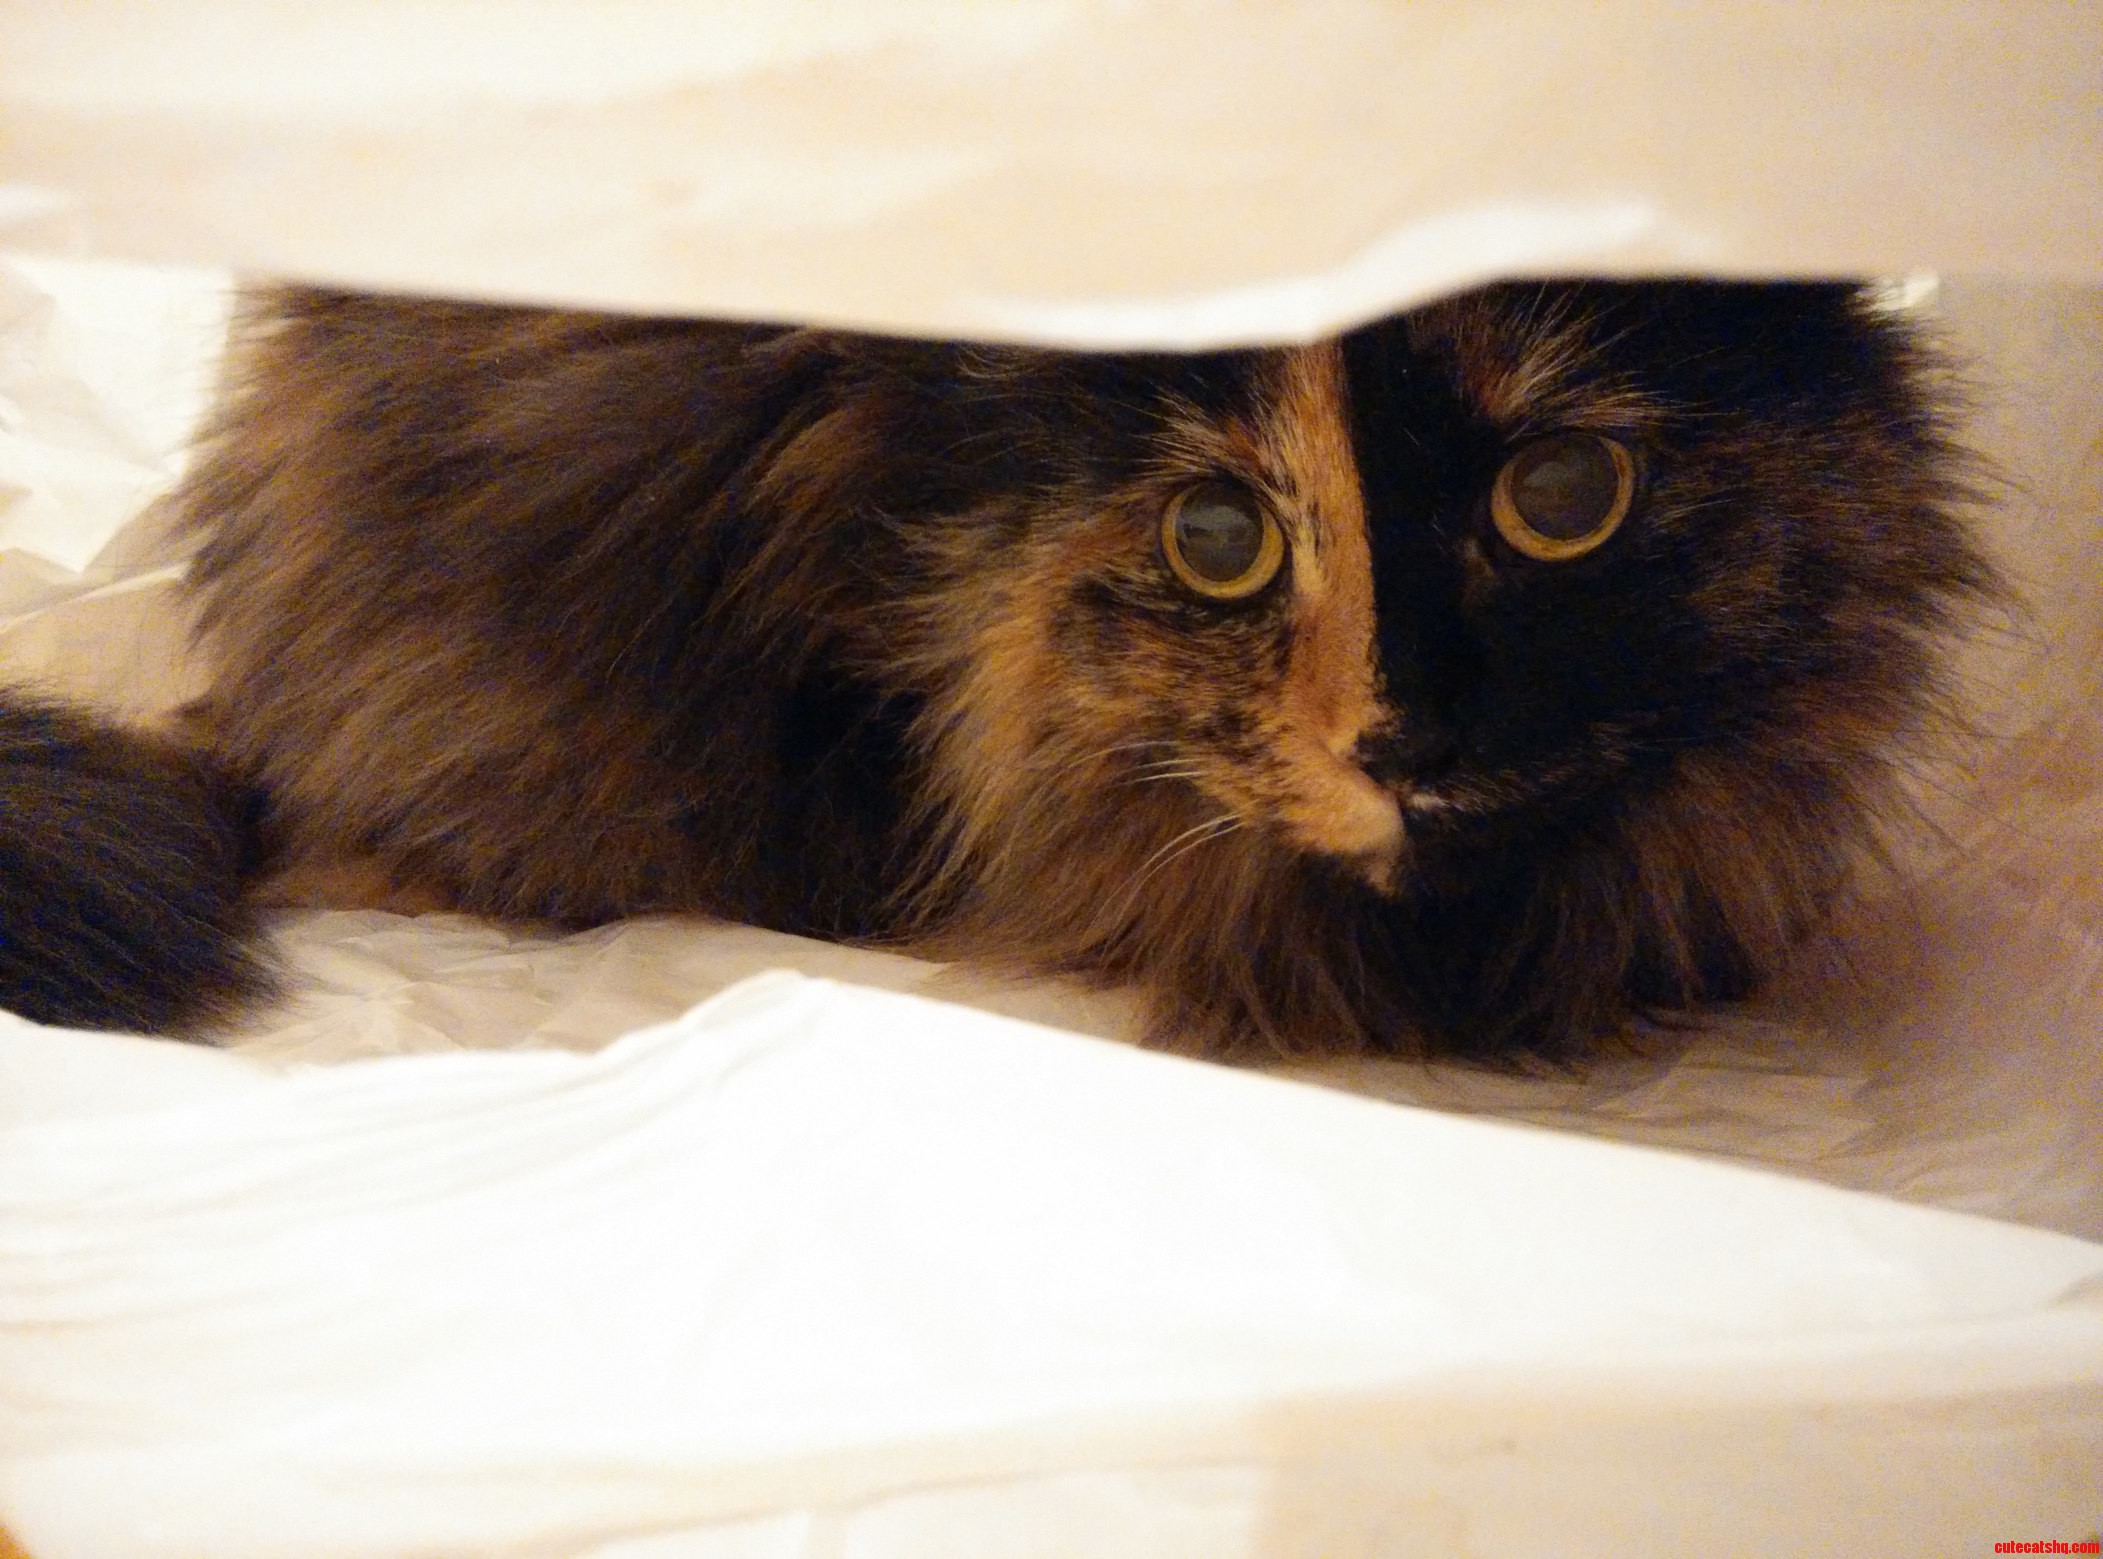 I have cat trees tunnels and tents but a 20 cent shopping bag is always her first choice.